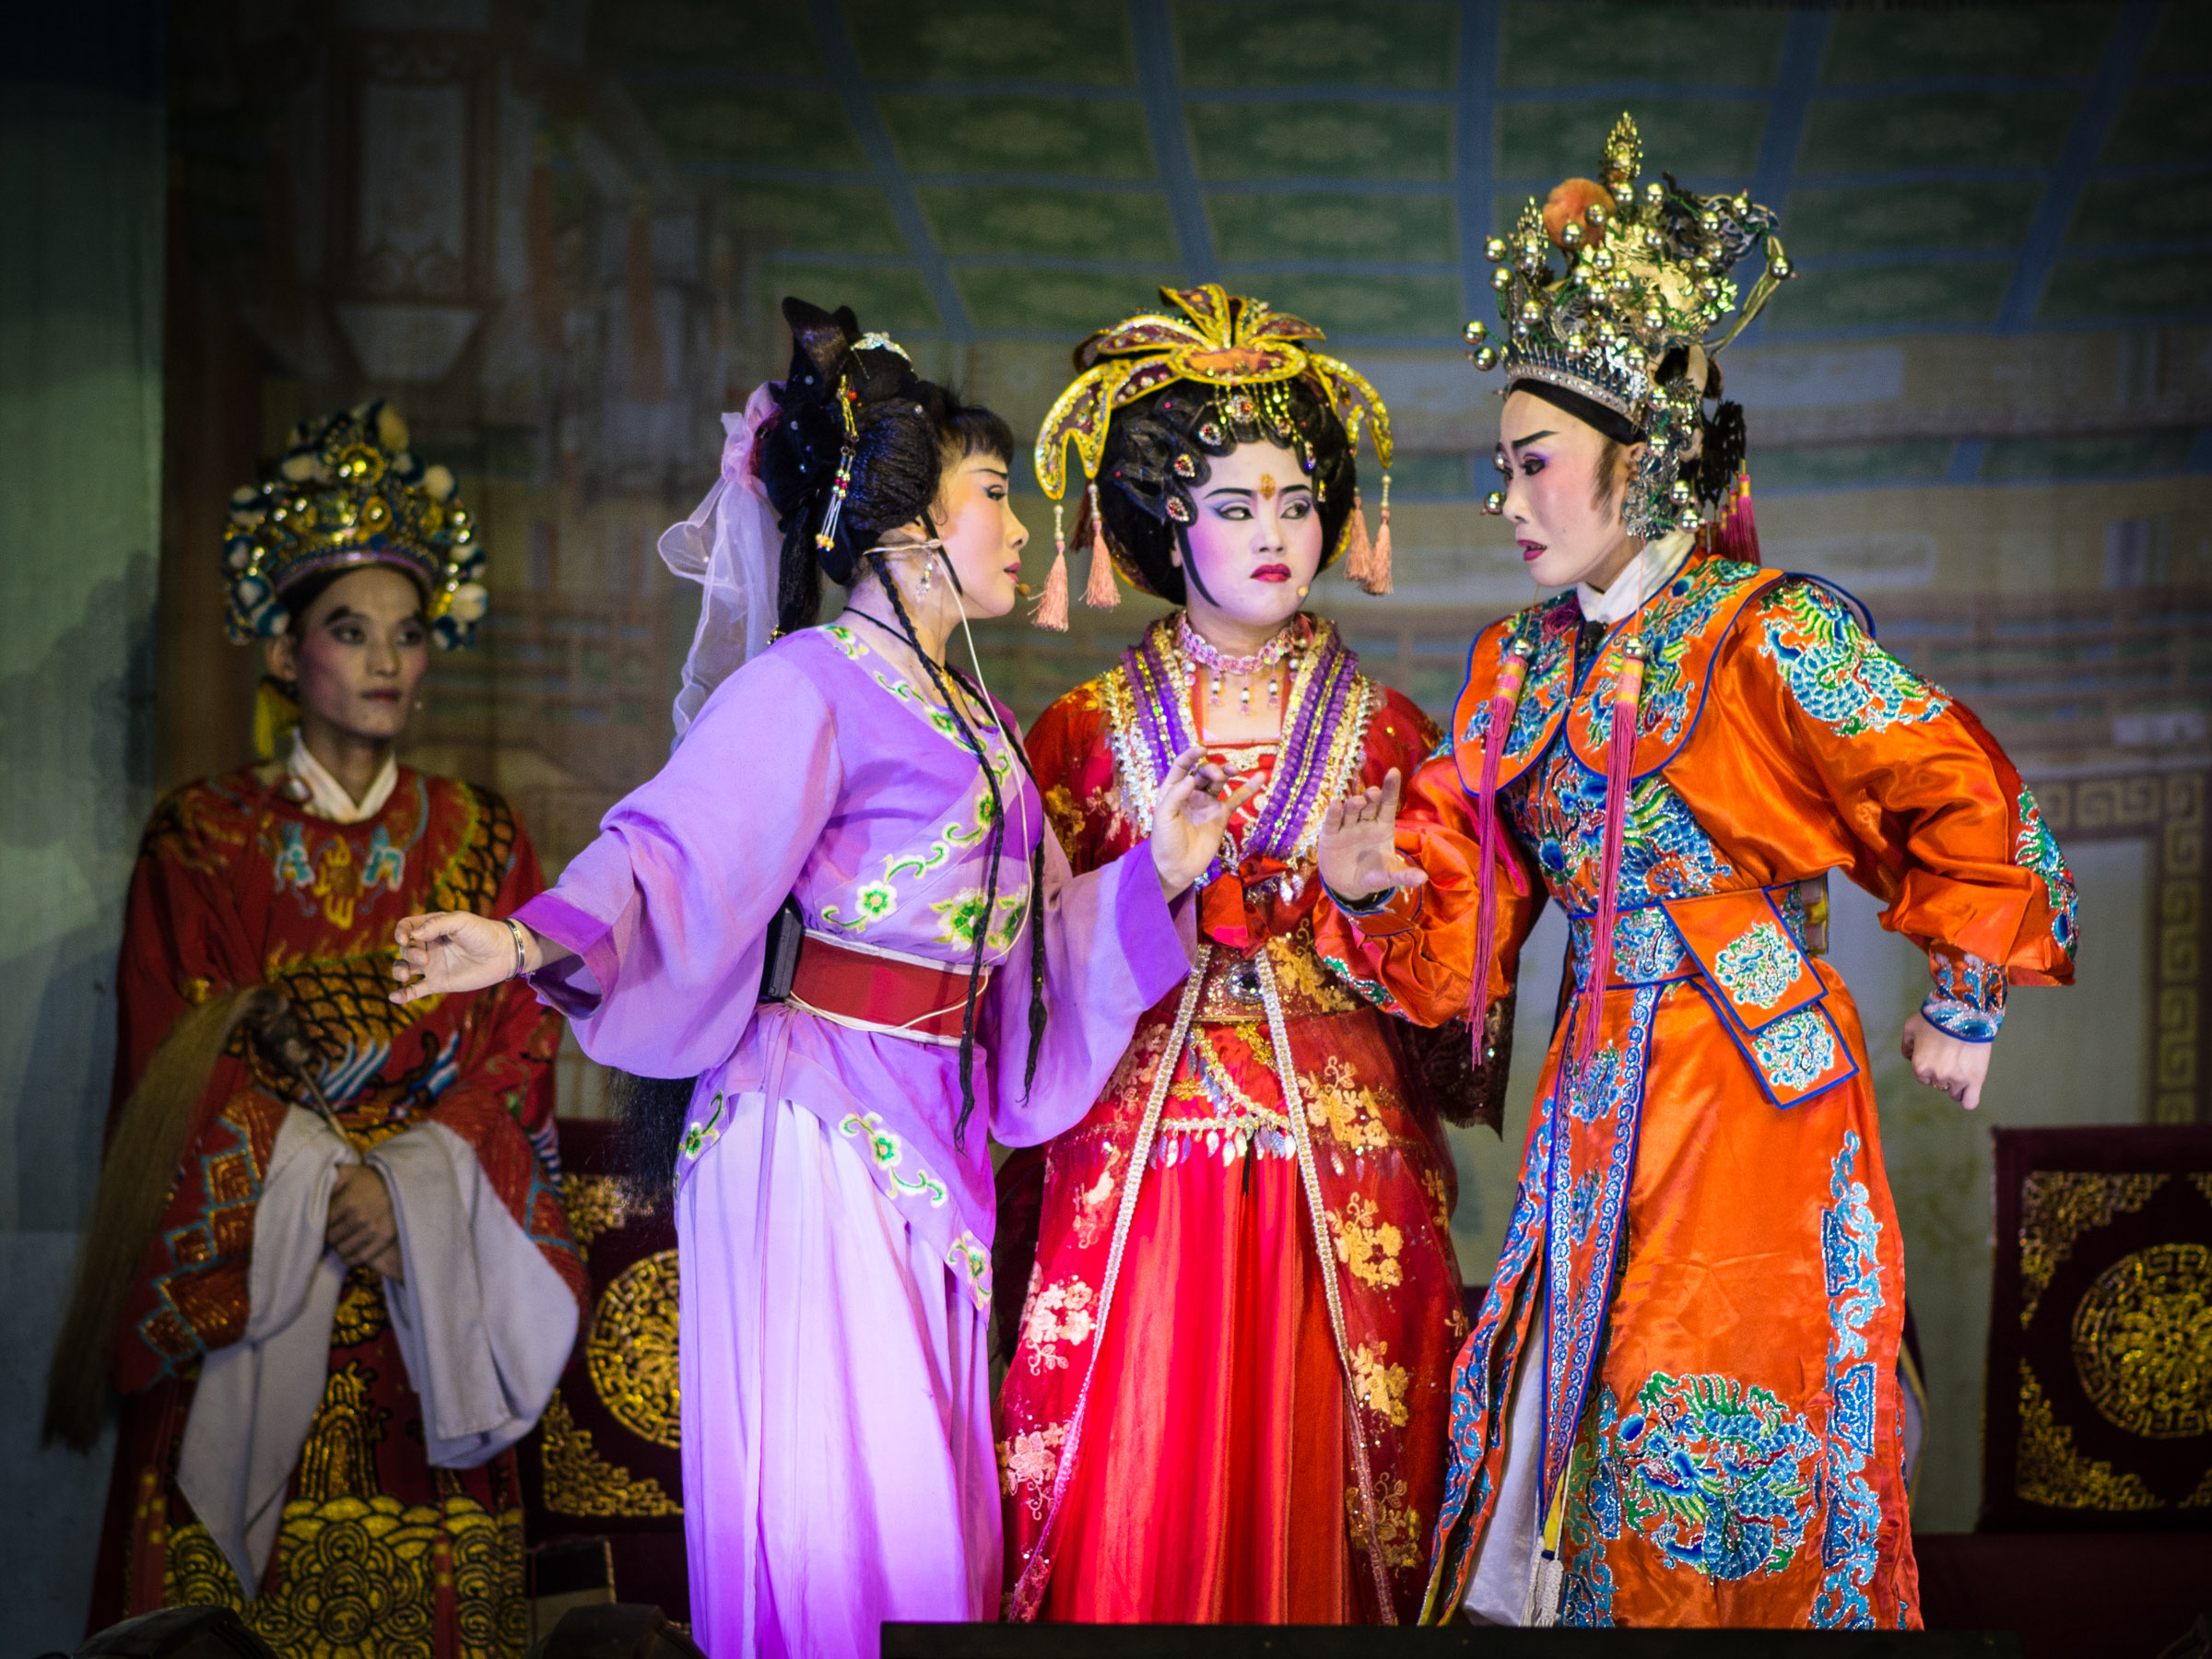 Chinese opera performers on stage in elaborate costumes